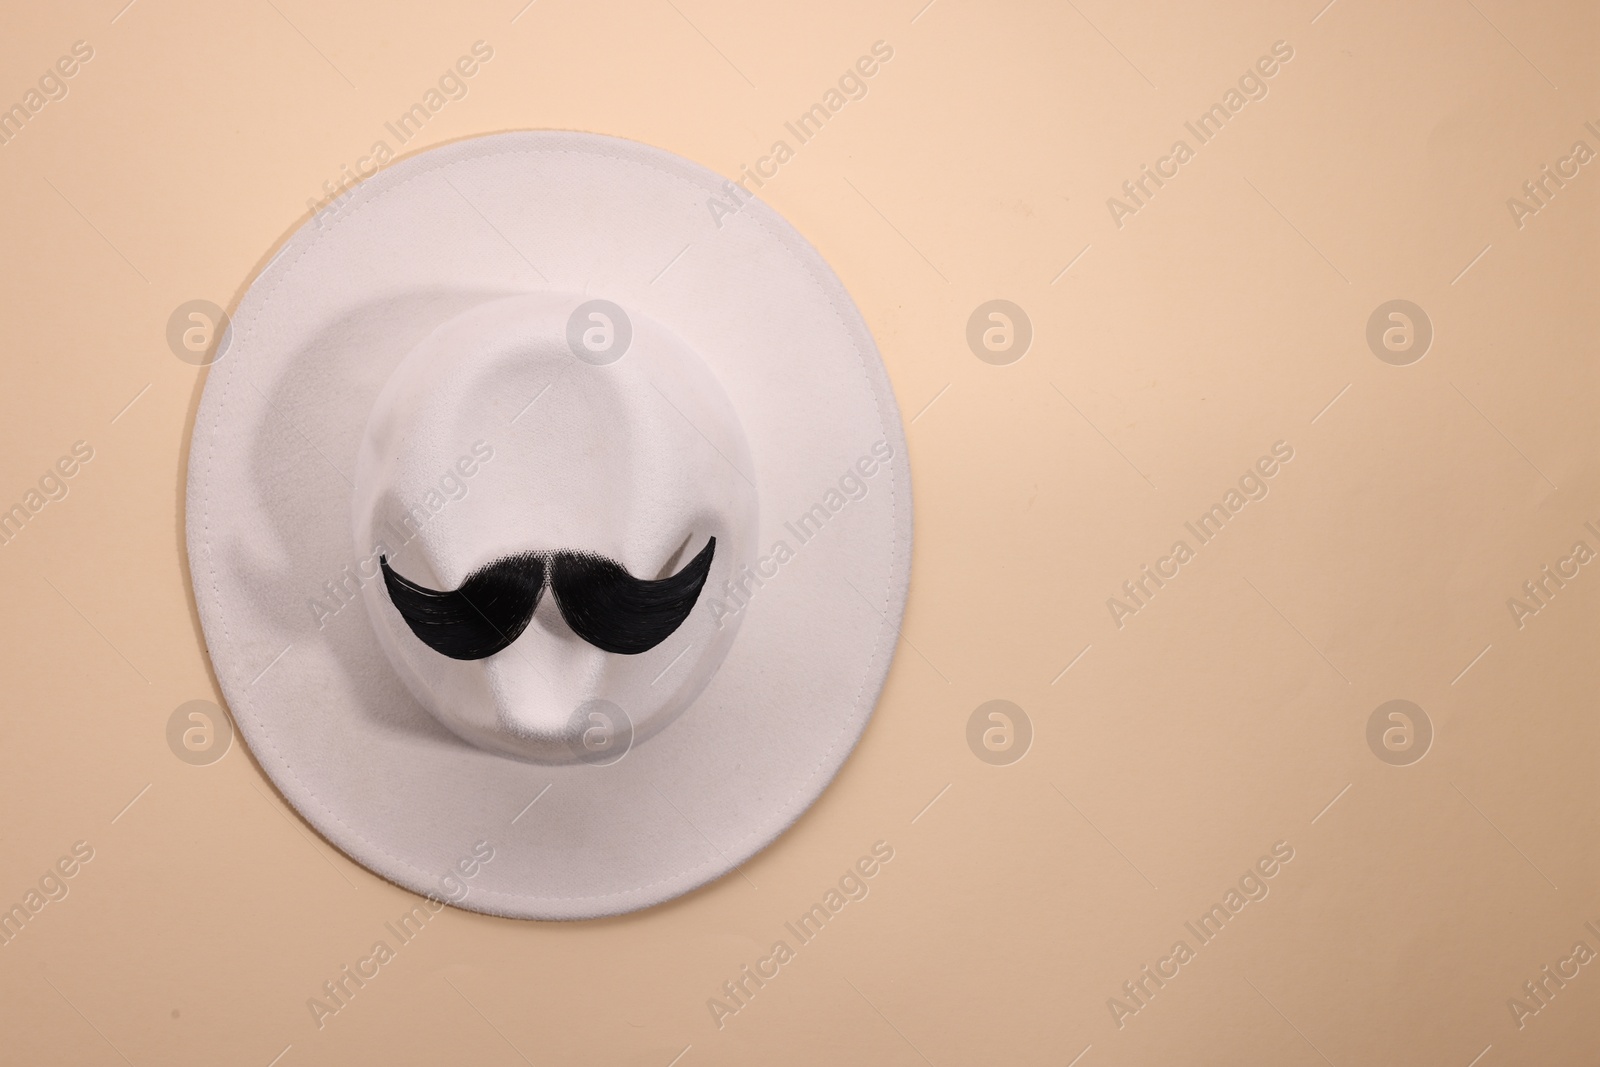 Photo of Man's face made of artificial mustache and hat on beige background, top view. Space for text